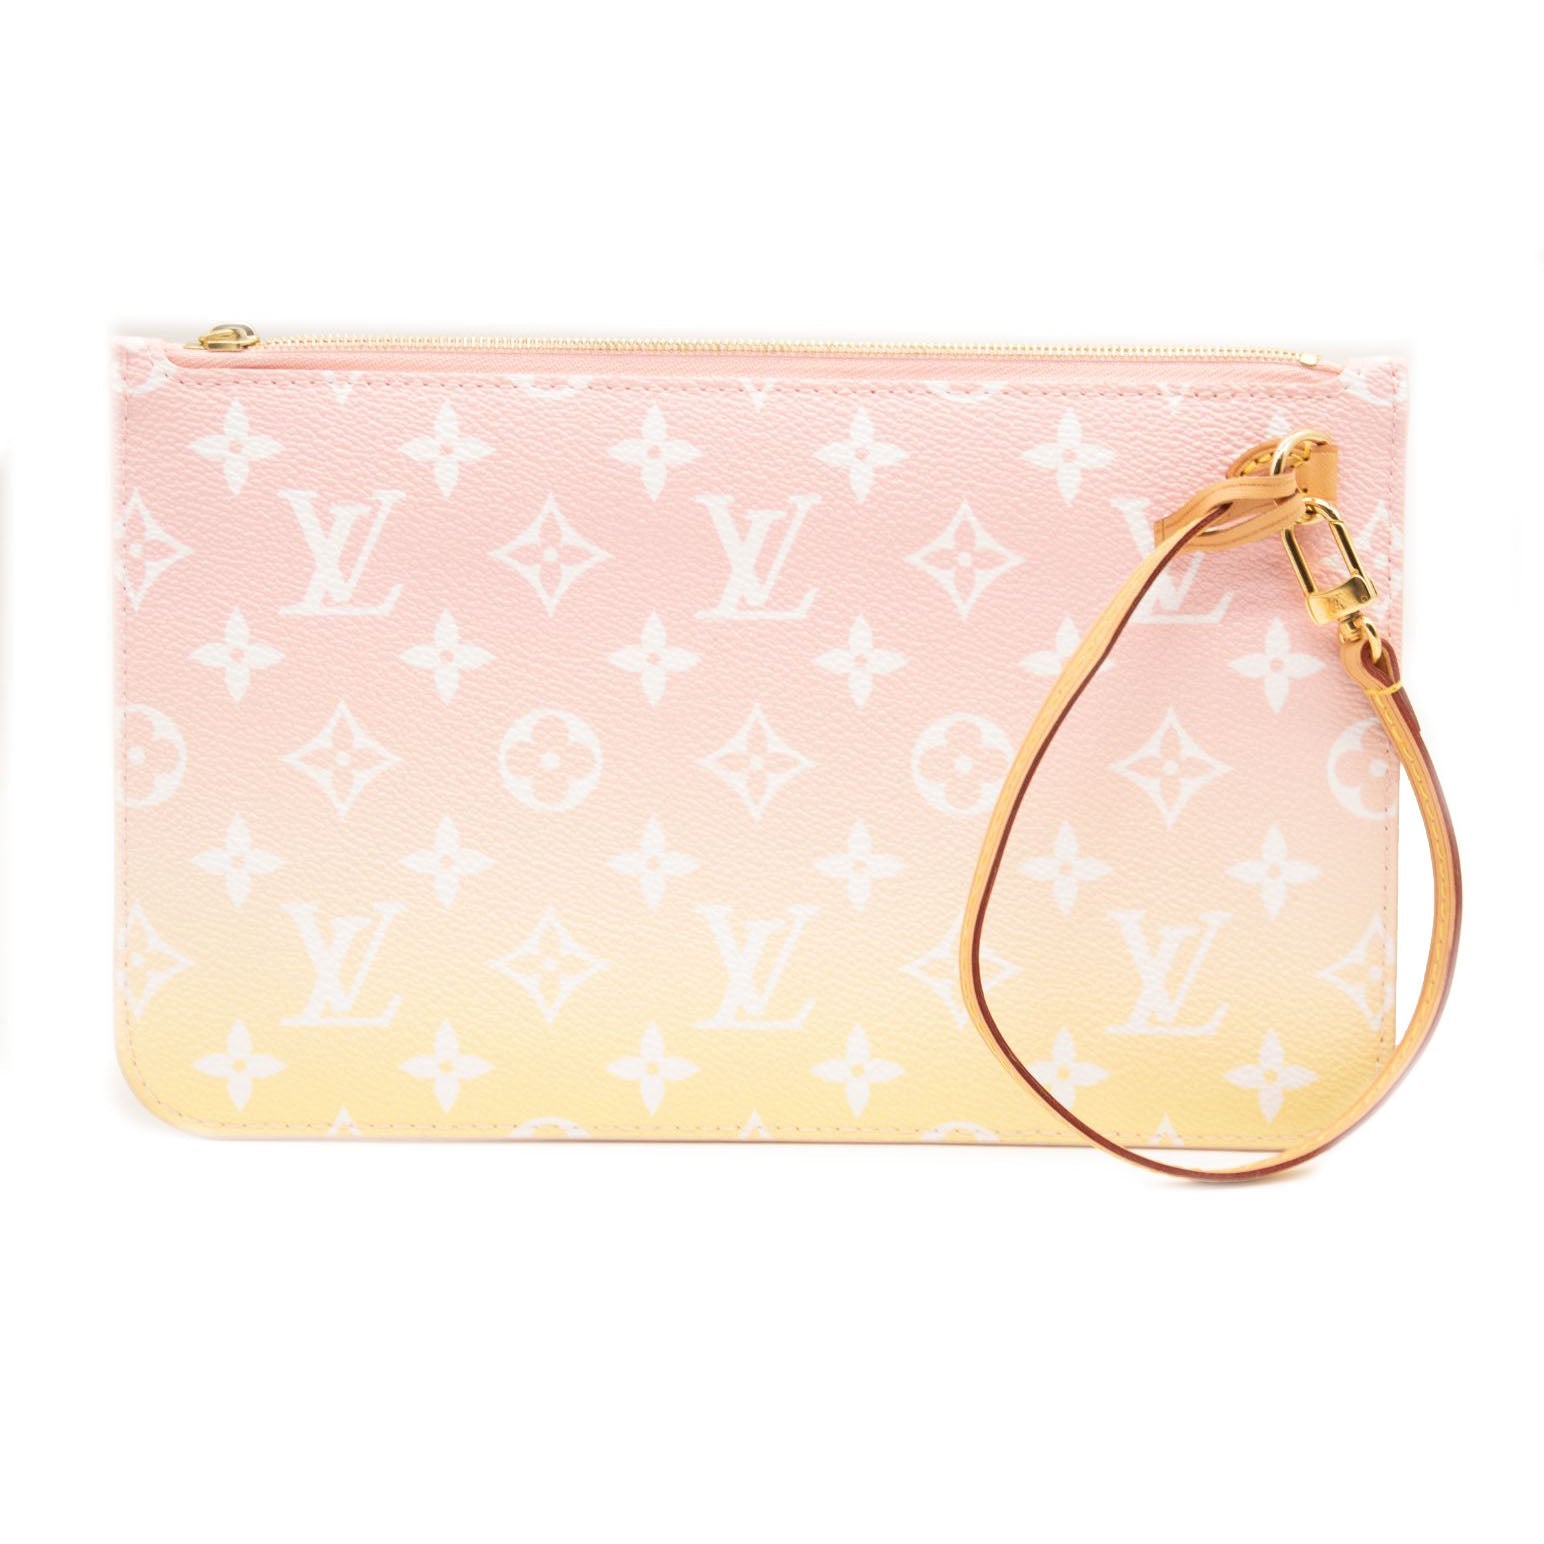 LOUIS VUITTON BY THE POOL NEVERFULL MM PINK & REMOVABLE POUCH